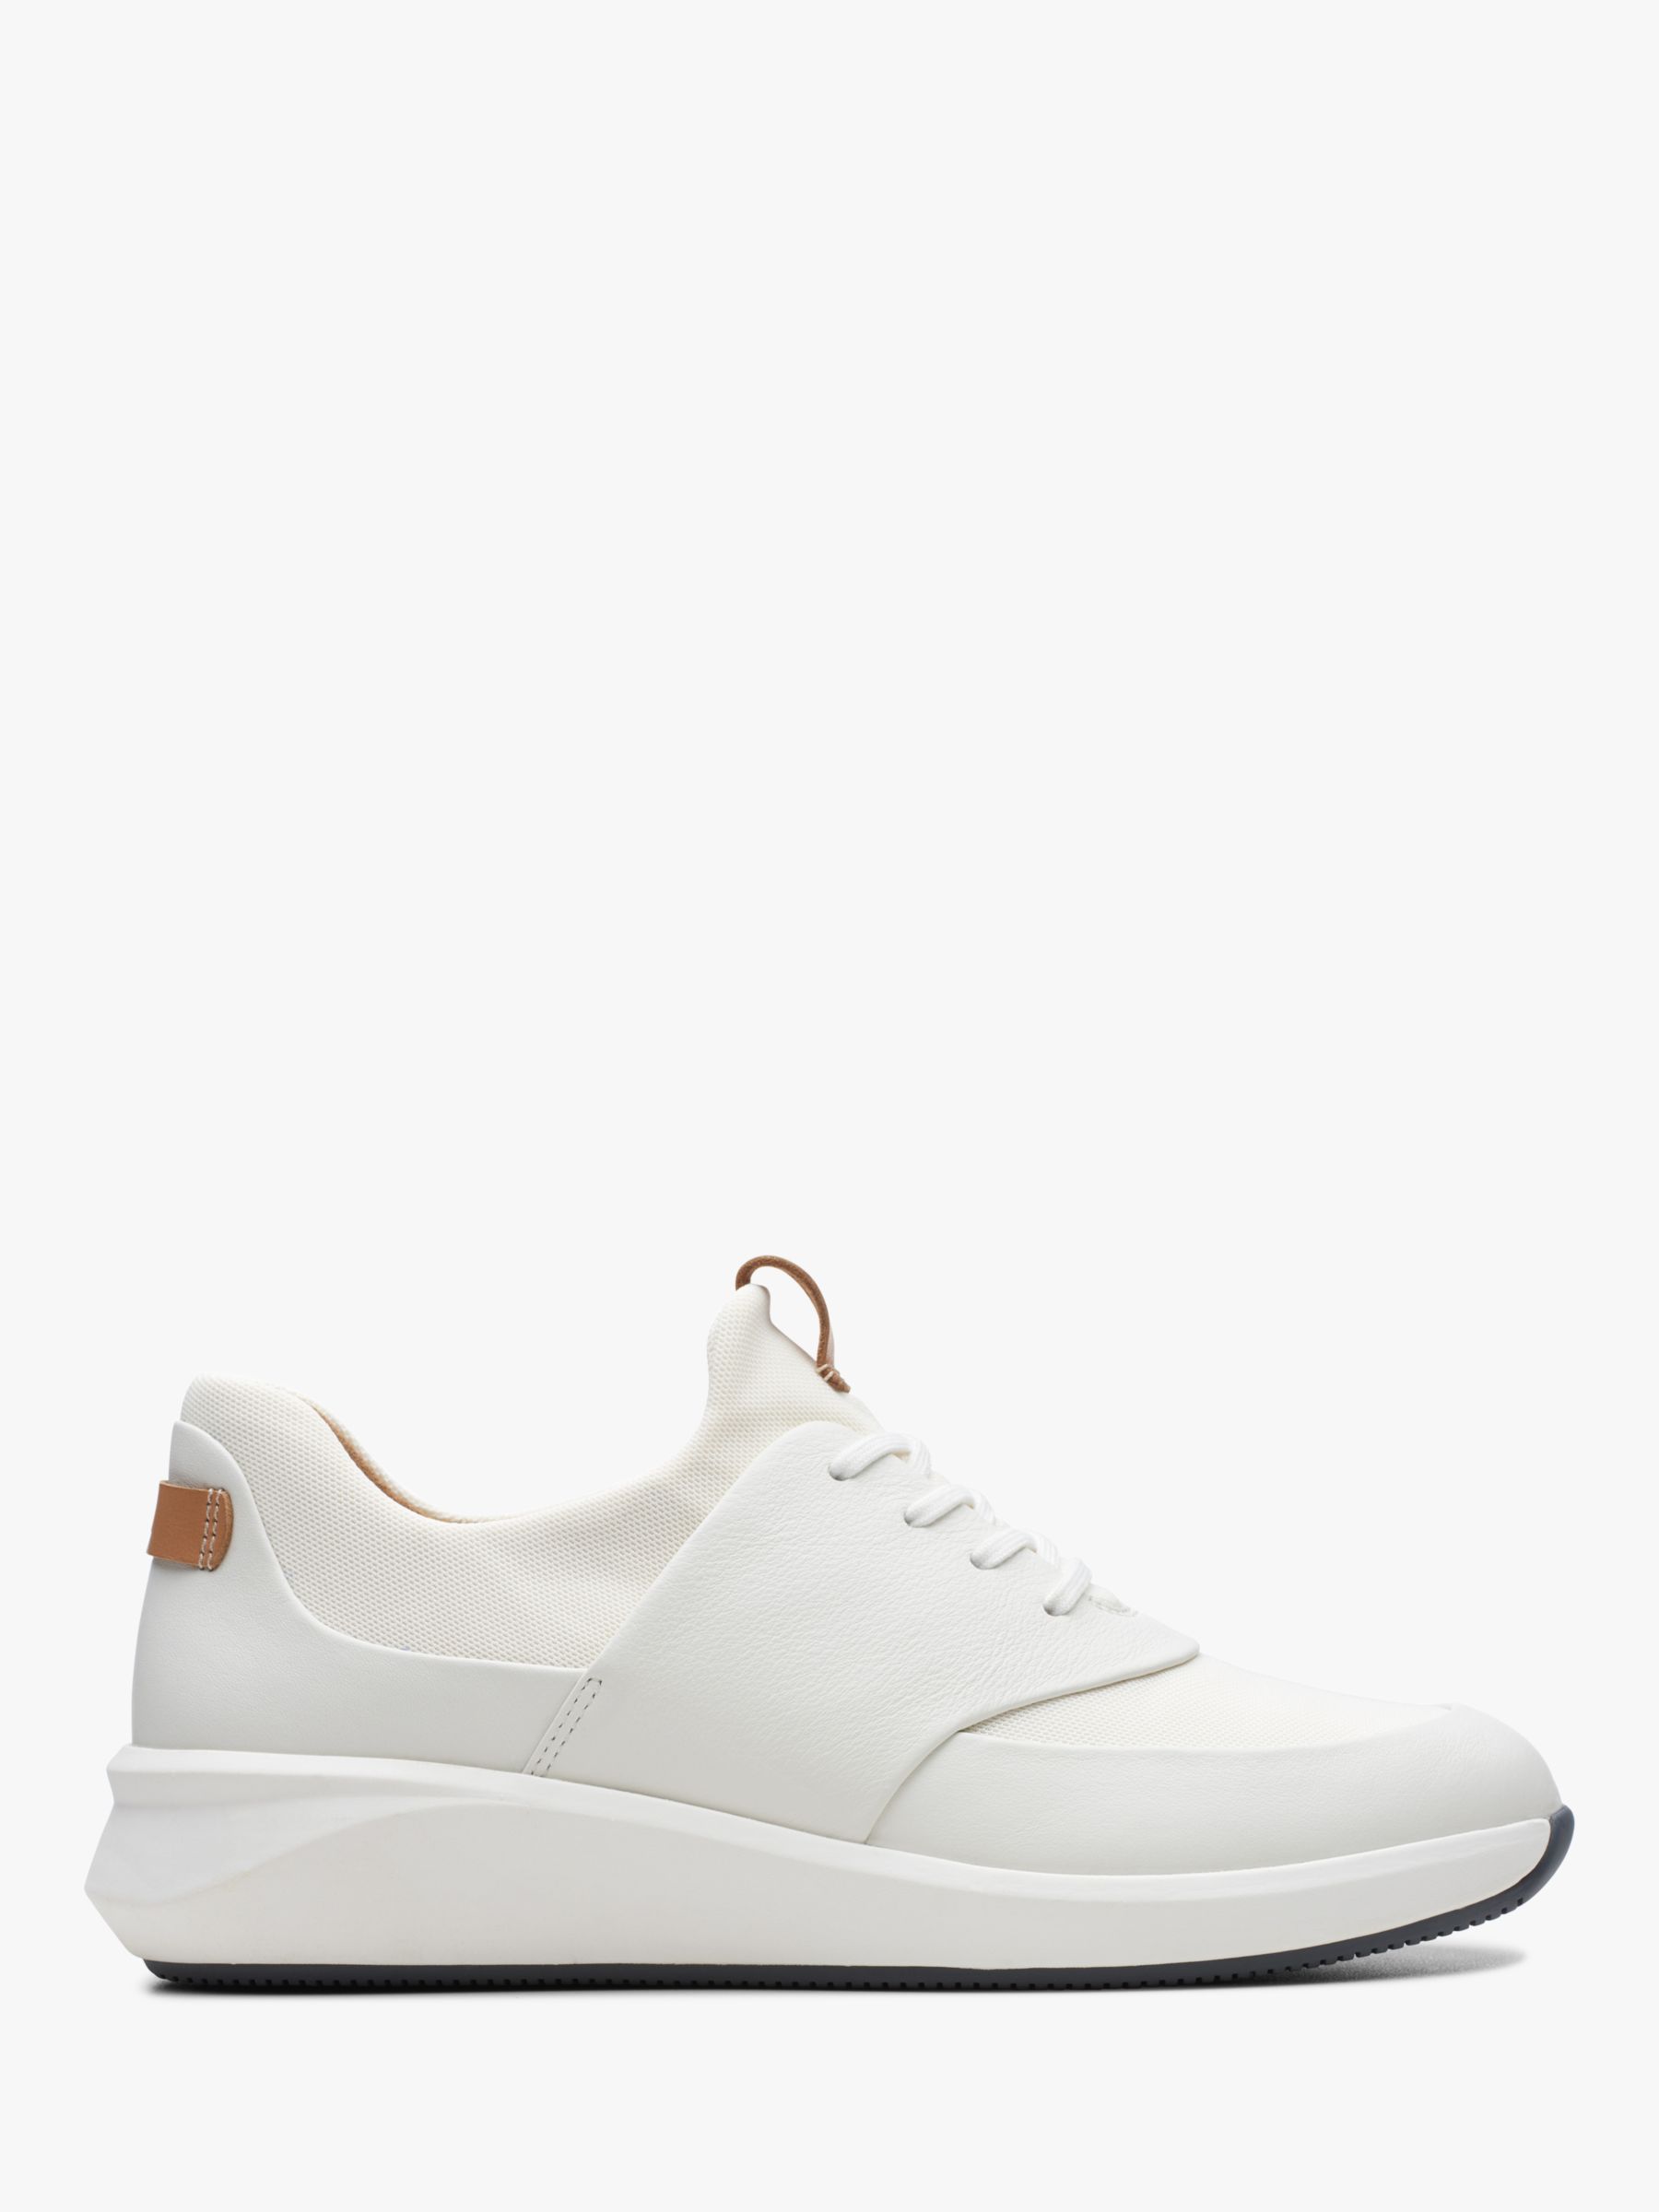 Clarks Un Rio Lace Up Leather Trainers, White at John Lewis & Partners